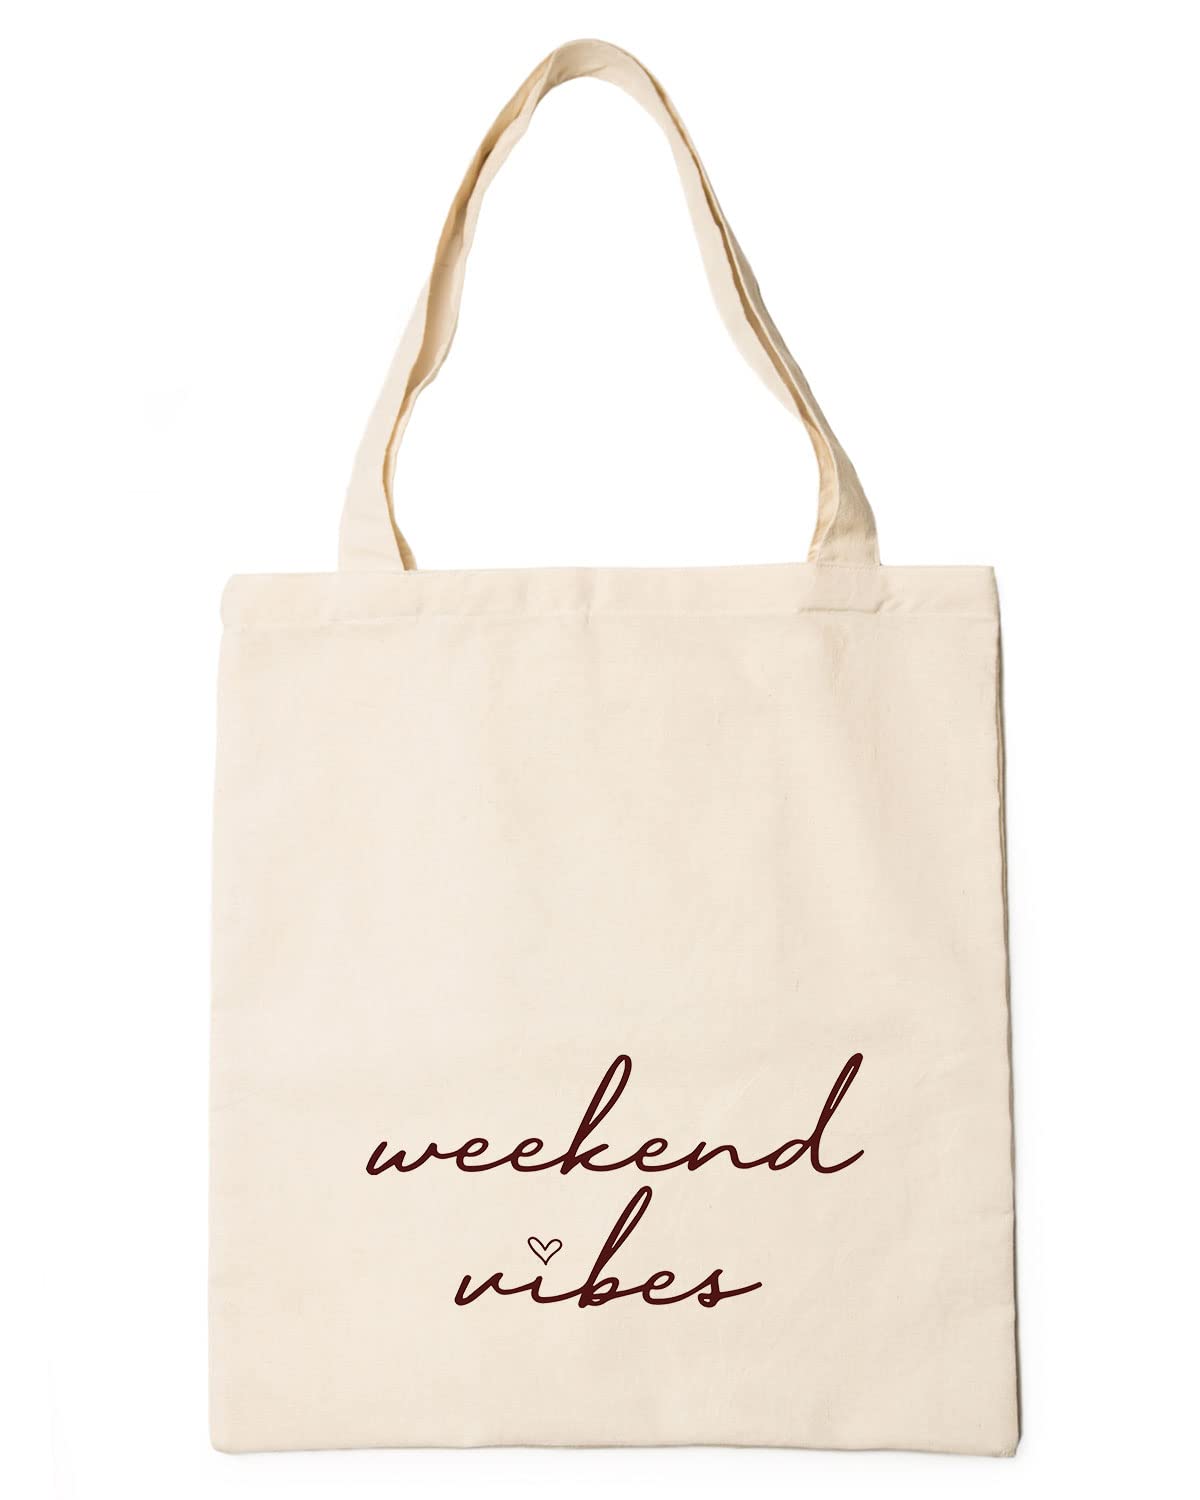 The Pink Magnet Weekend Vibes Tote Bag - Canvas Tote Bag for Women | Printed Multipurpose Cotton Bags | Cute Hand Bag for Girls | Best for College, Travel, Grocery | Reusable Shopping Bag | Eco-Friendly Tote Bag